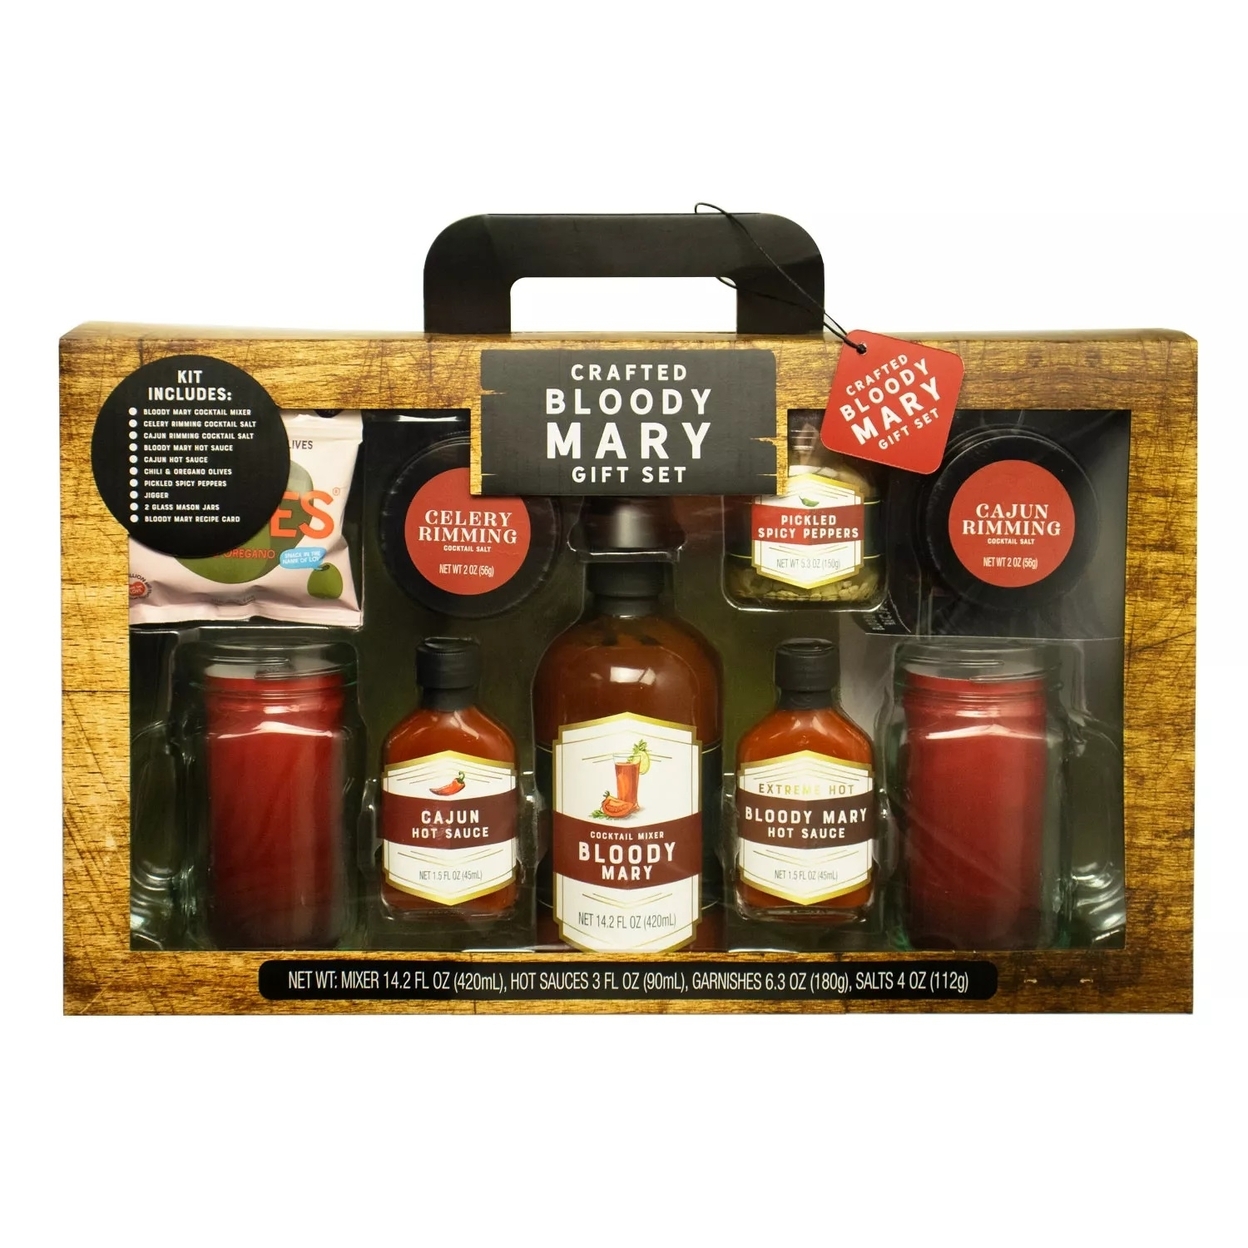 Crafted Bloody Mary Gift Set